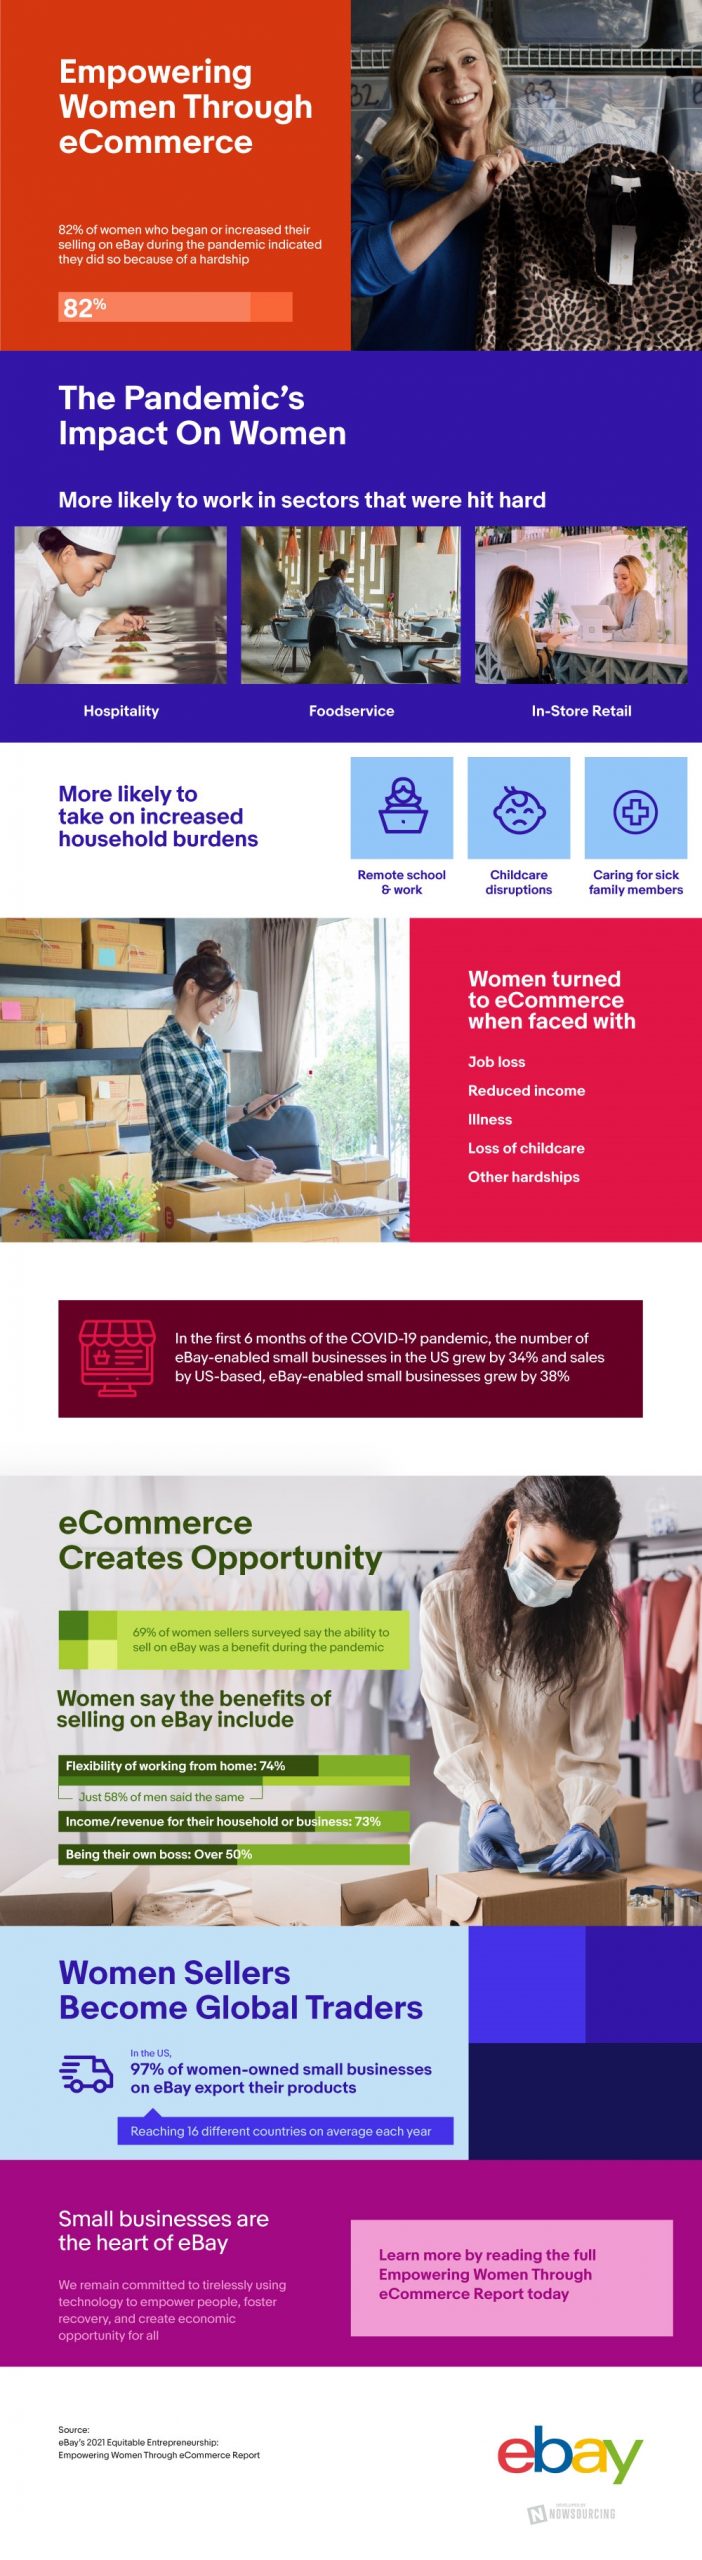 Empowering Women Business Owners Through eCommerce [Infographic]